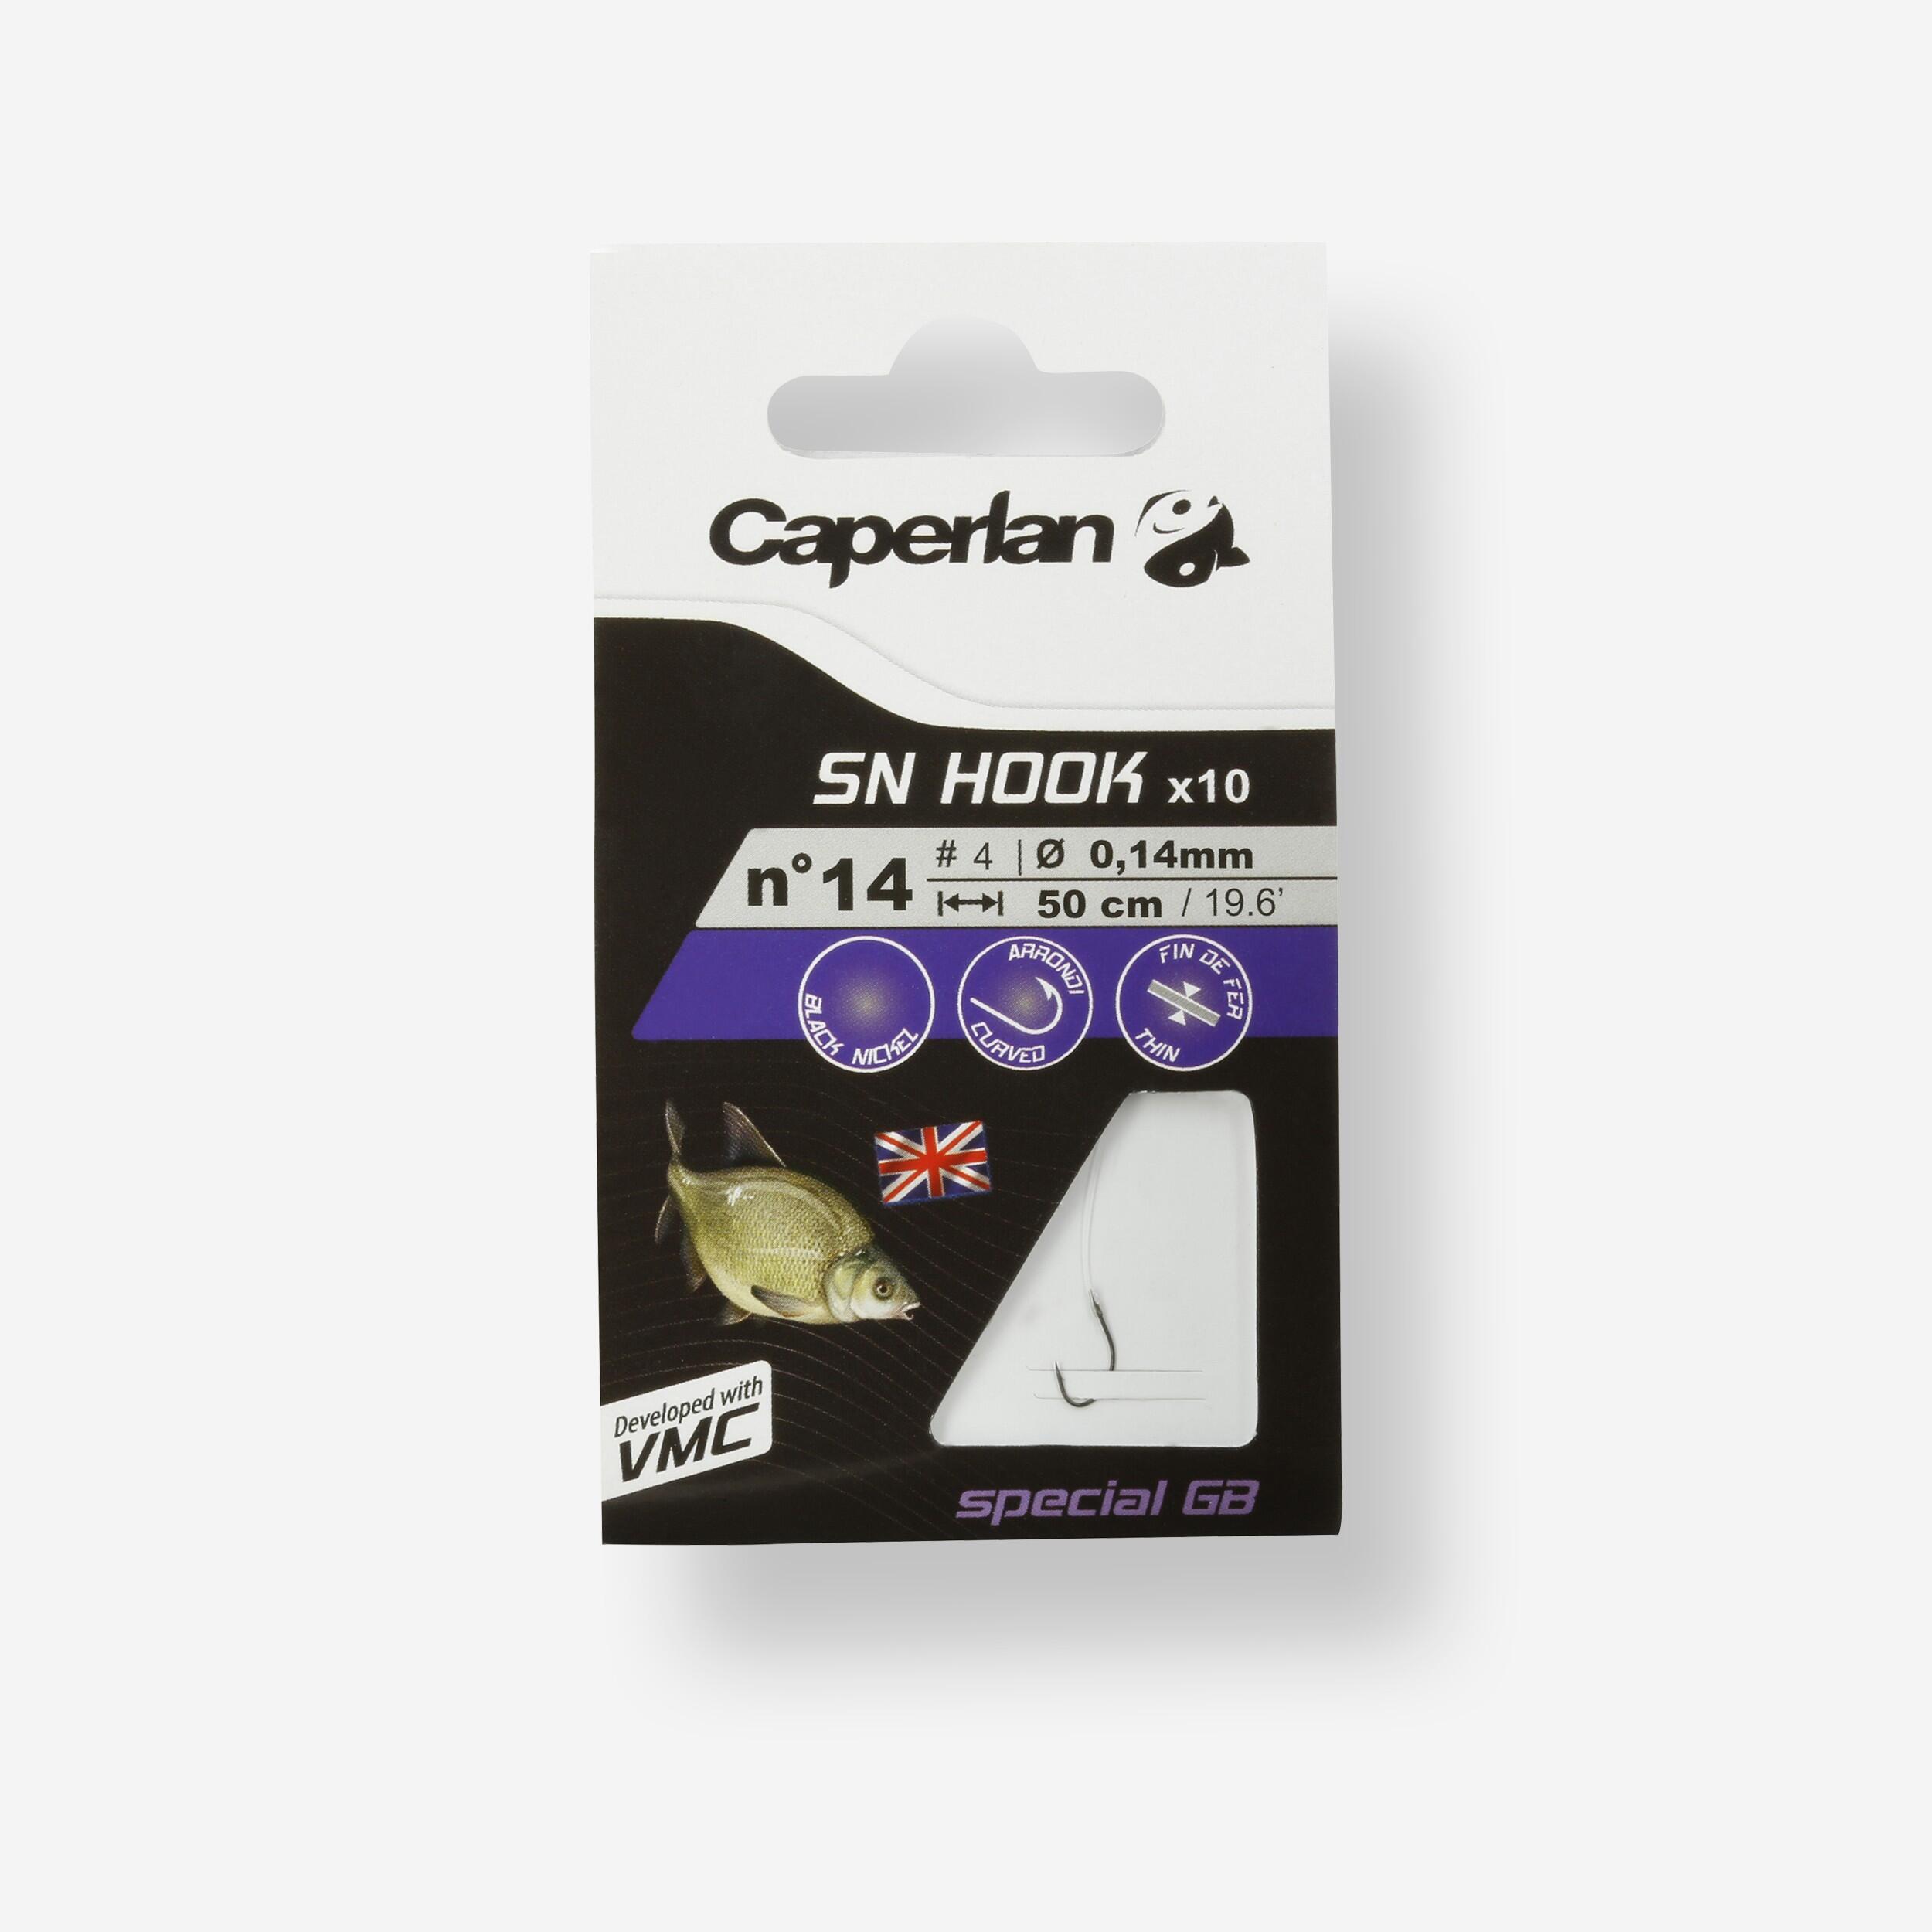 CAPERLAN SN Hook Special GB Fishing Rigged Hooks